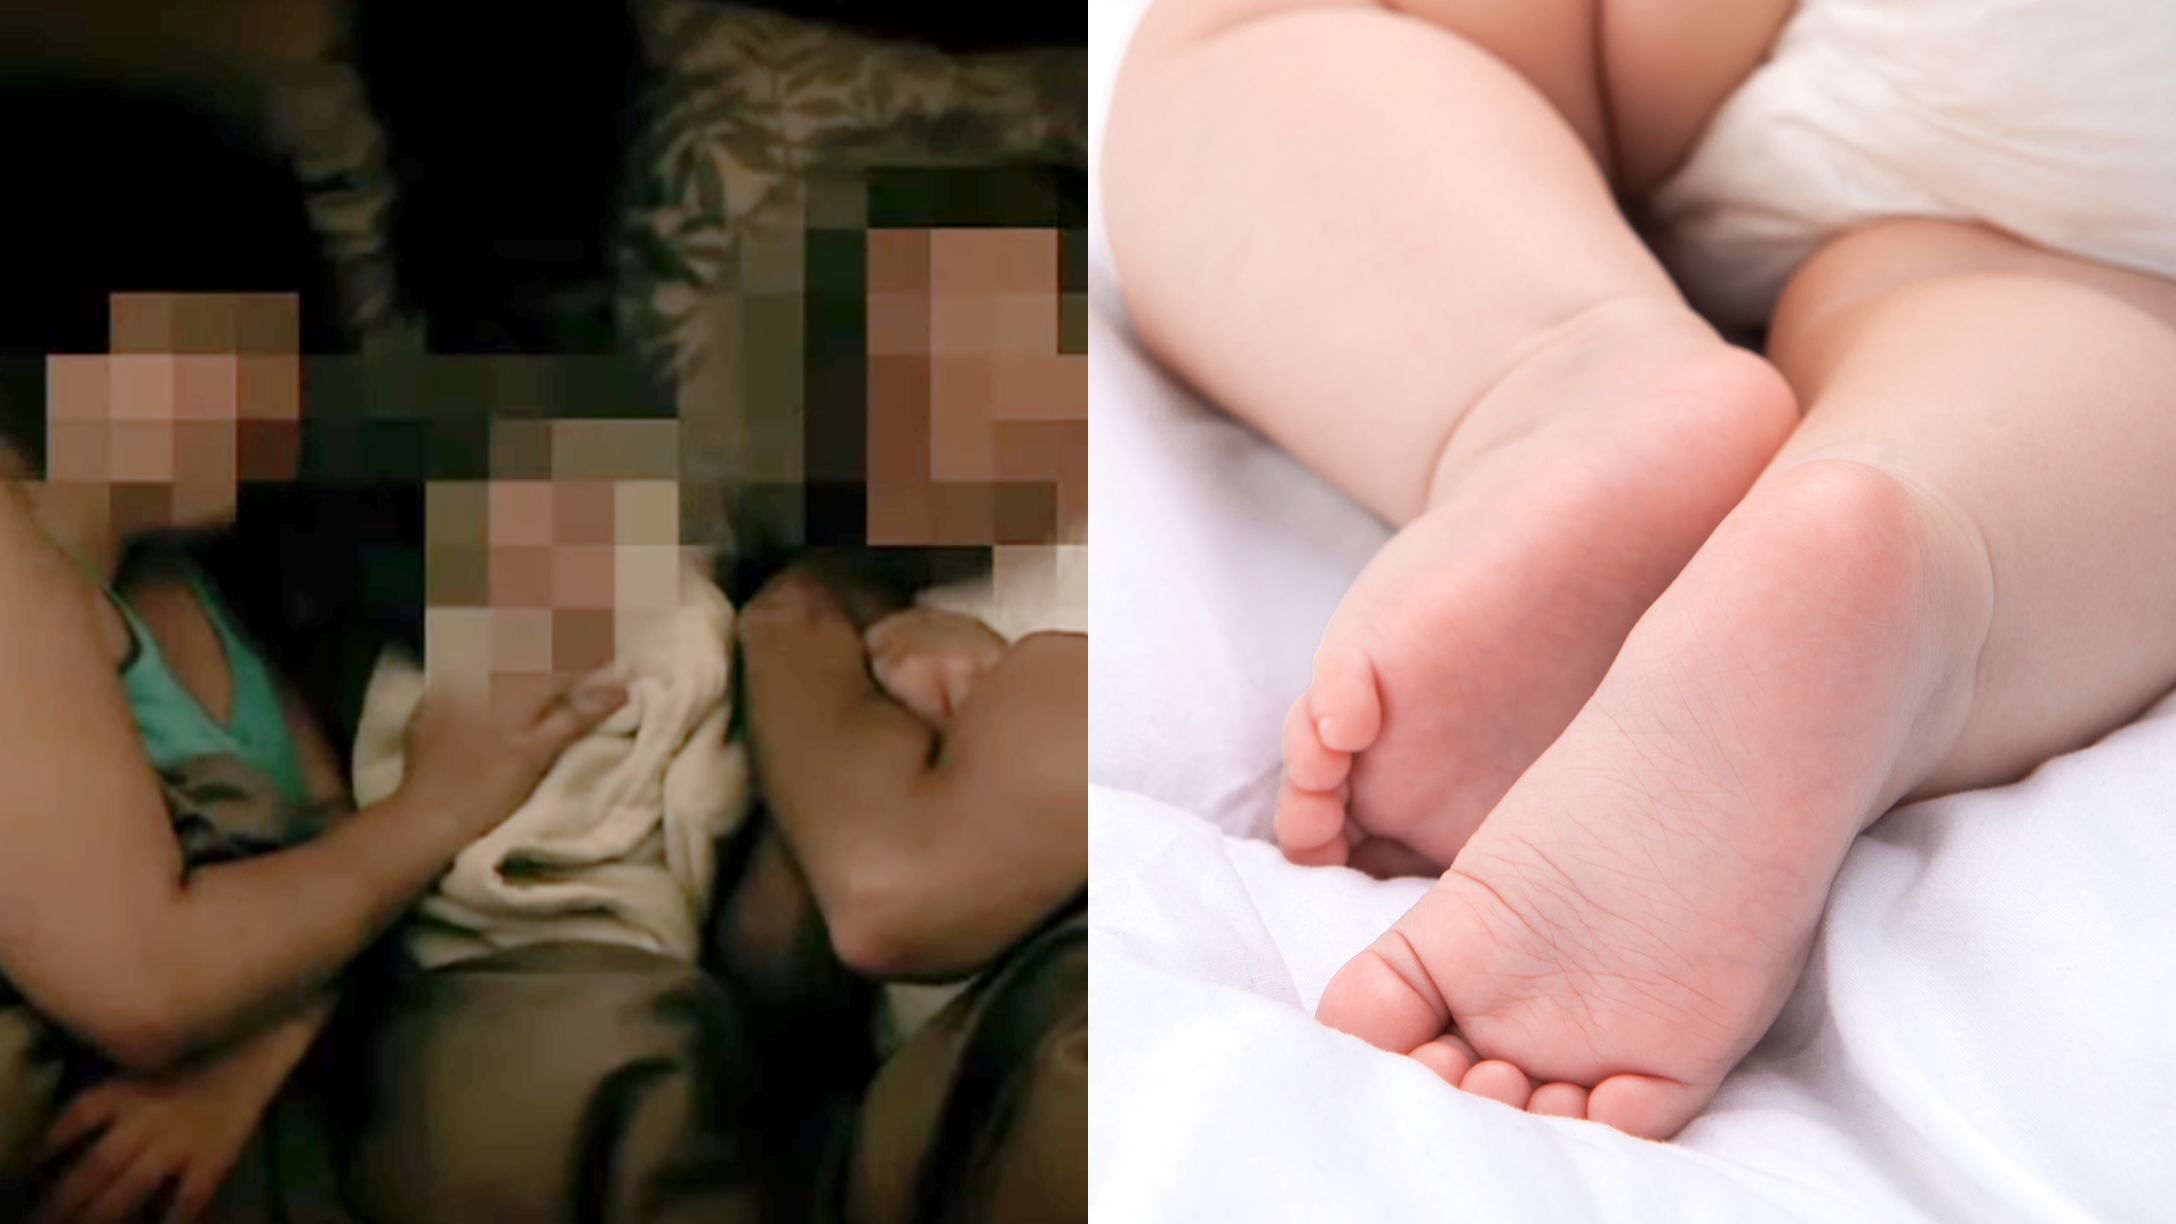 Co-Sleeping Mom Admits to Having Sex With Baby in Bed (VIDEO) CafeMom